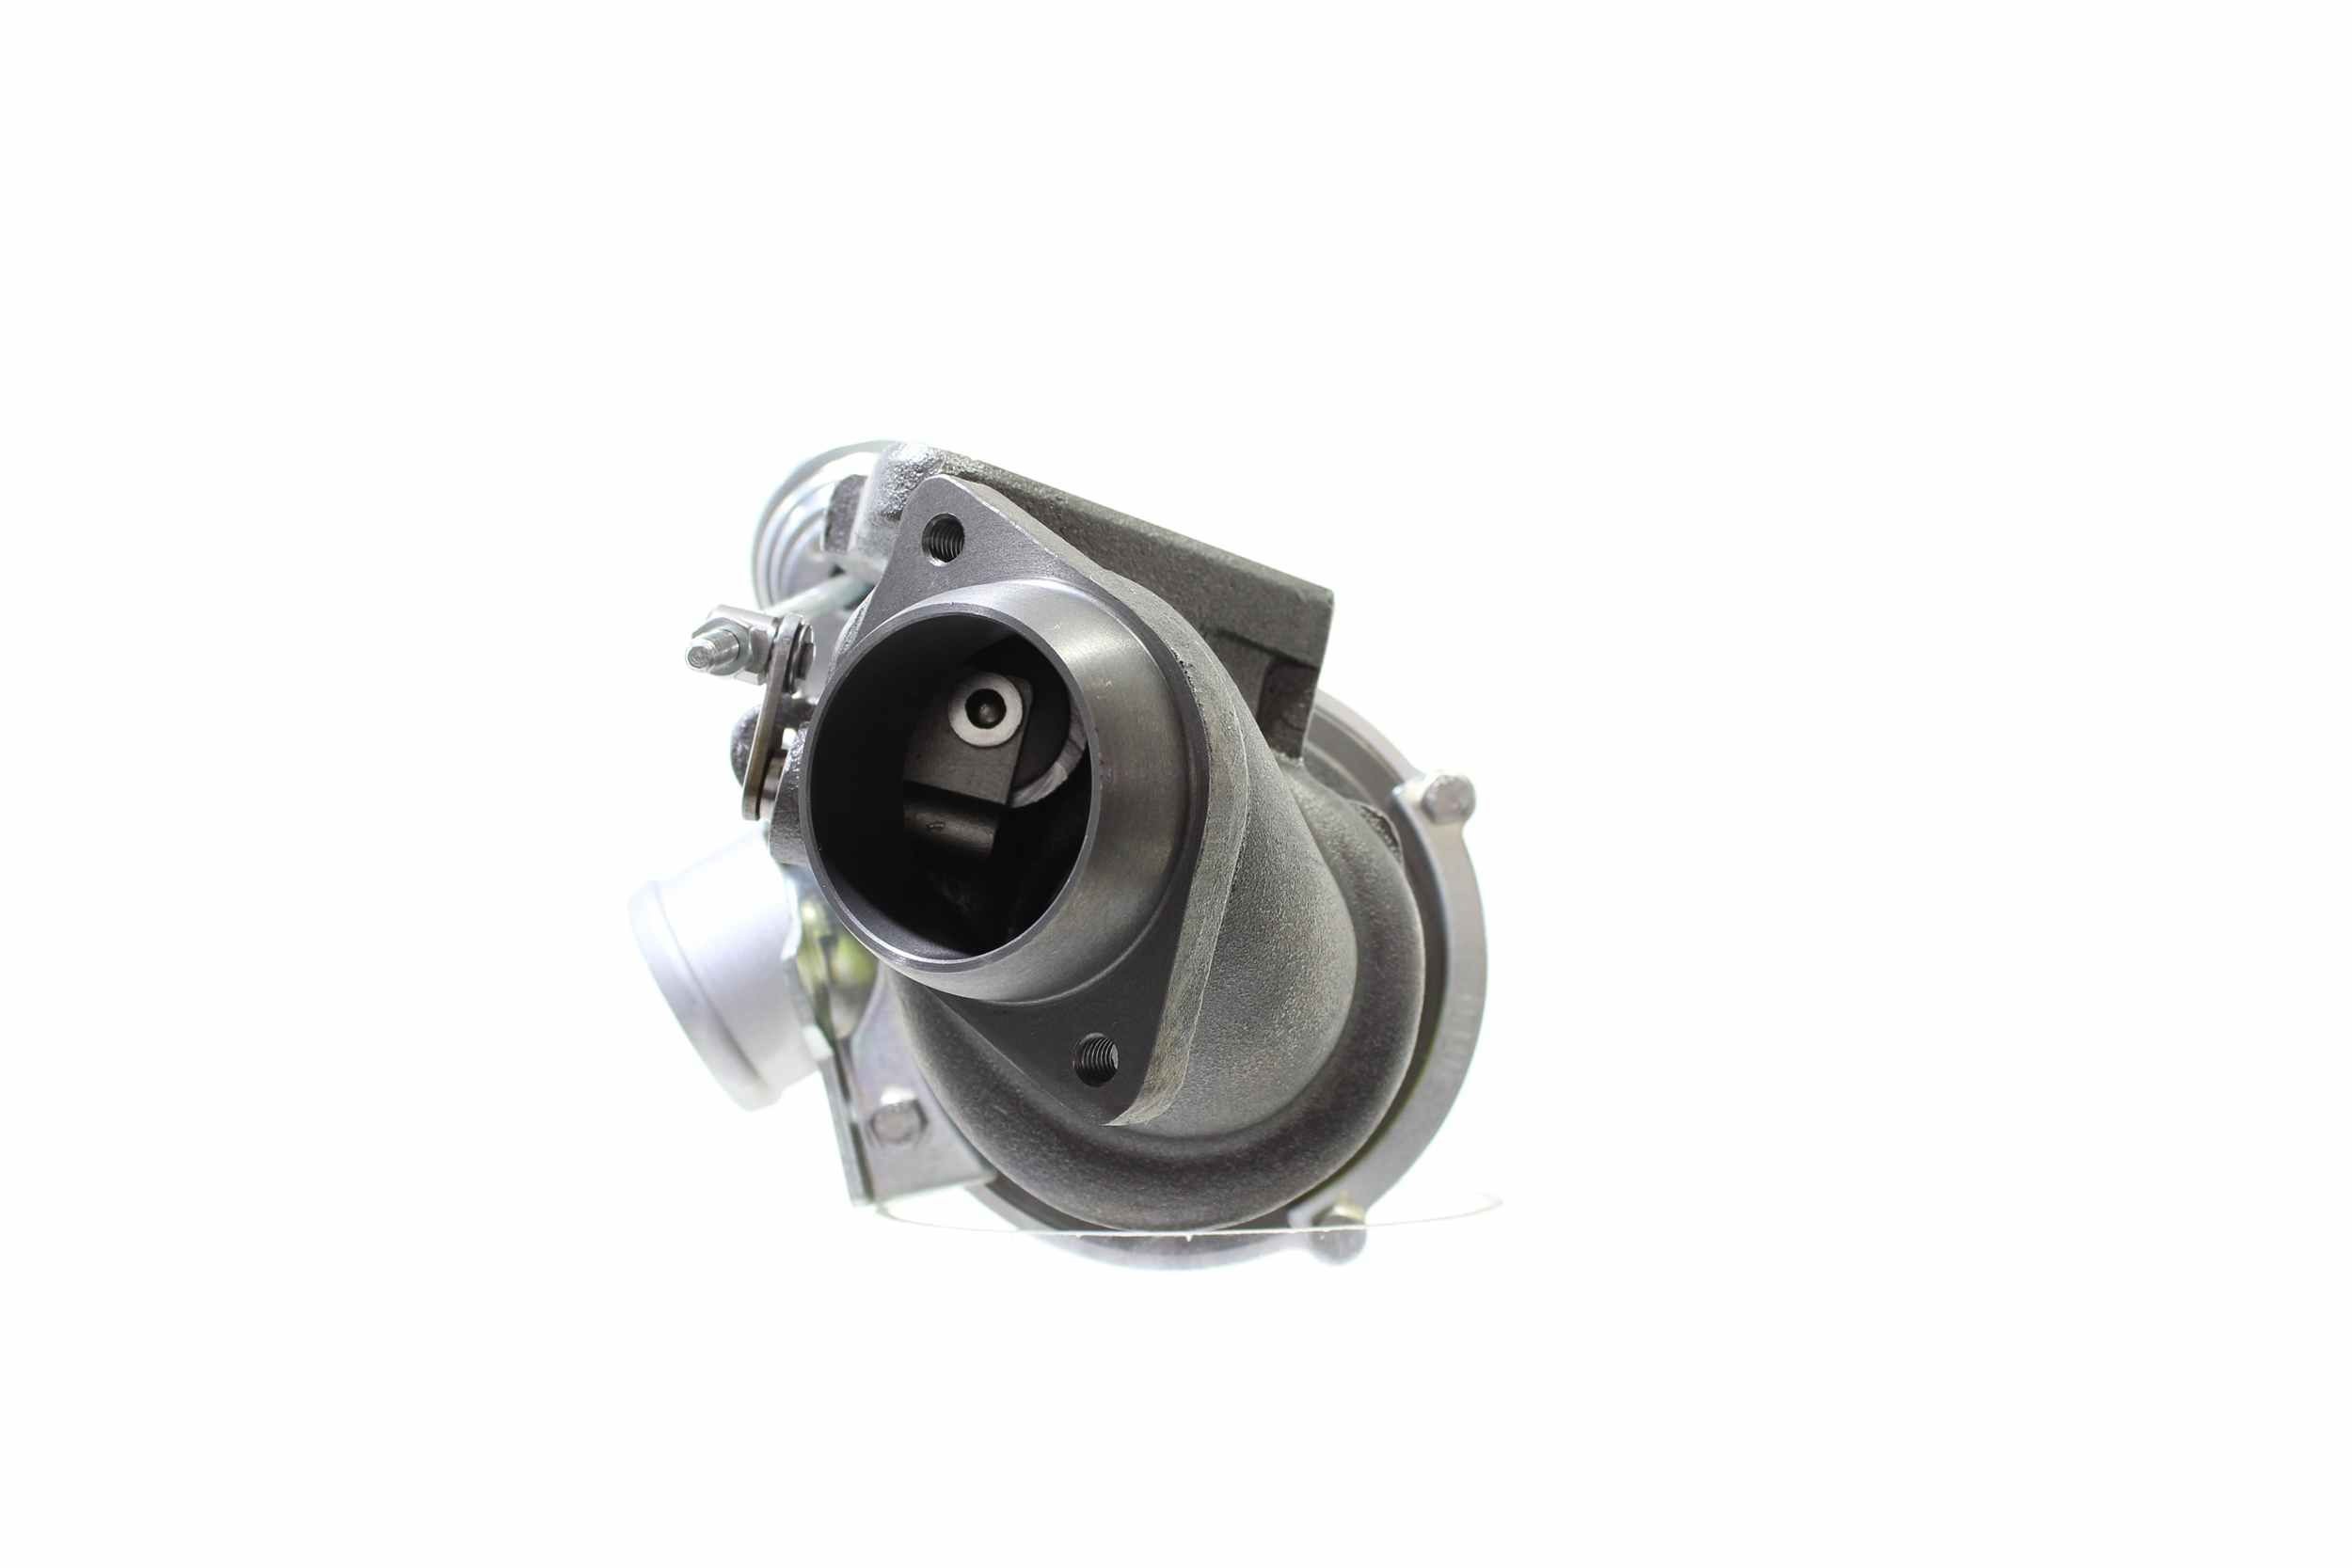 ALANKO 900557 Turbo Exhaust Turbocharger, Engine, Incl. Gasket Set, with attachment material